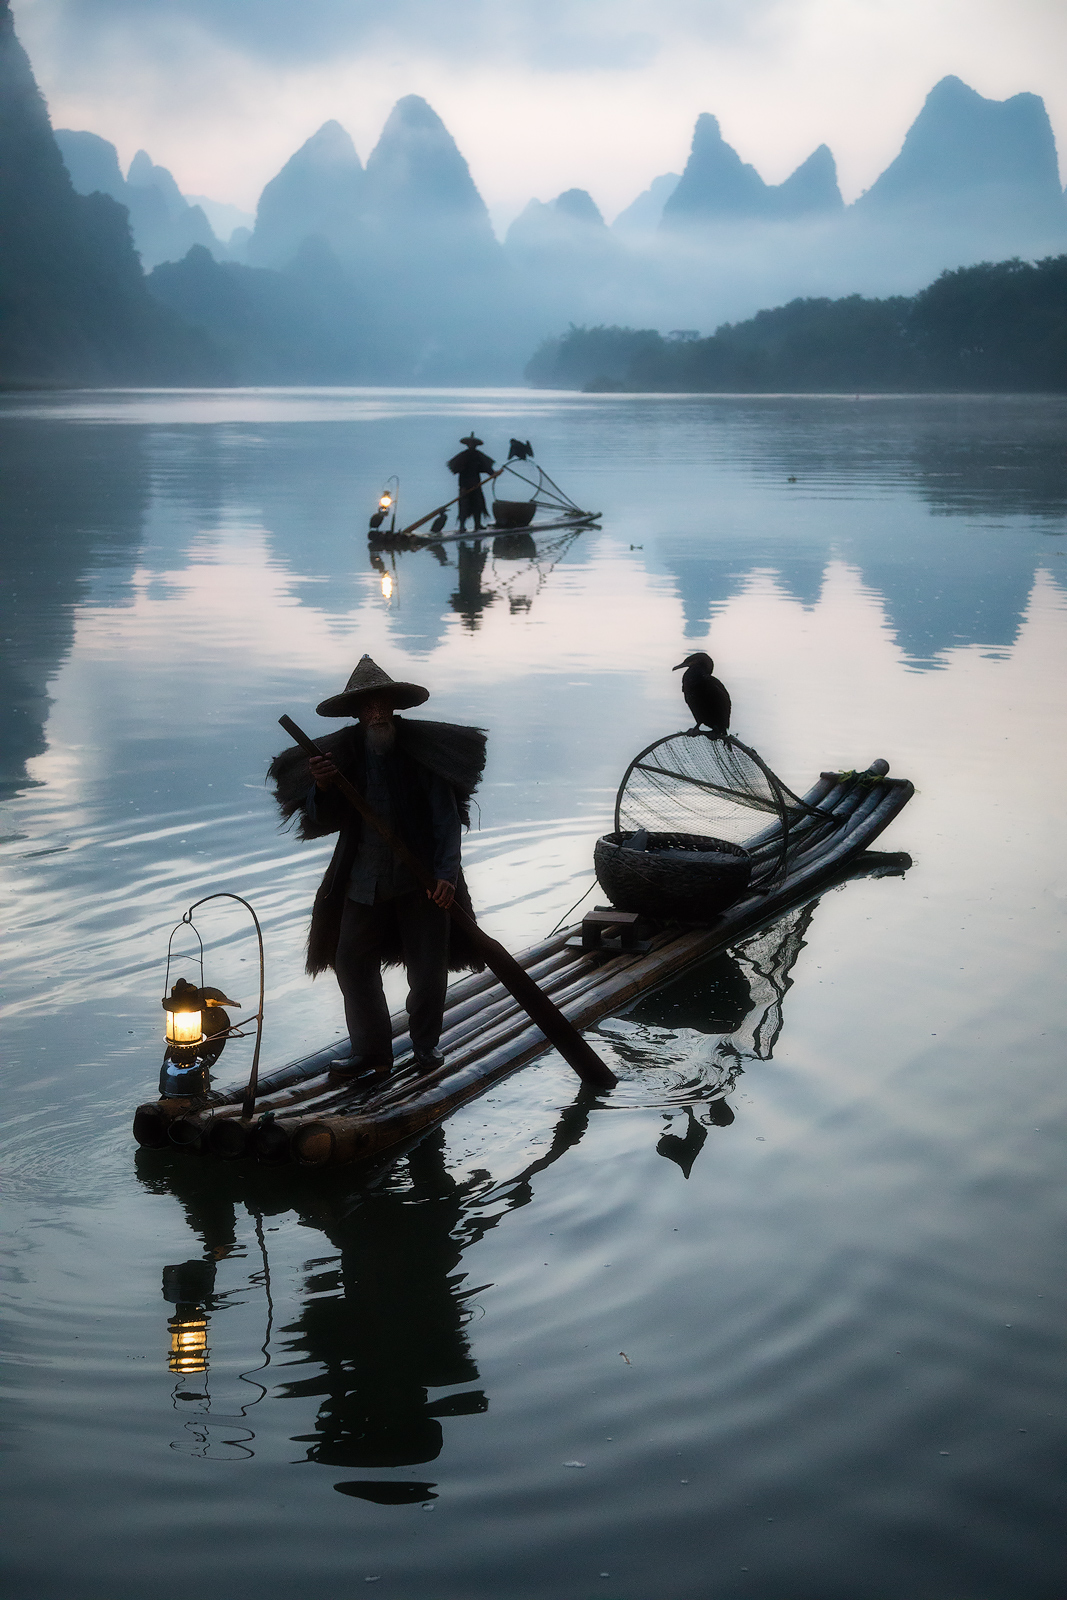 A ripple from the fisherman's oar surrounds his raft on the Li River.